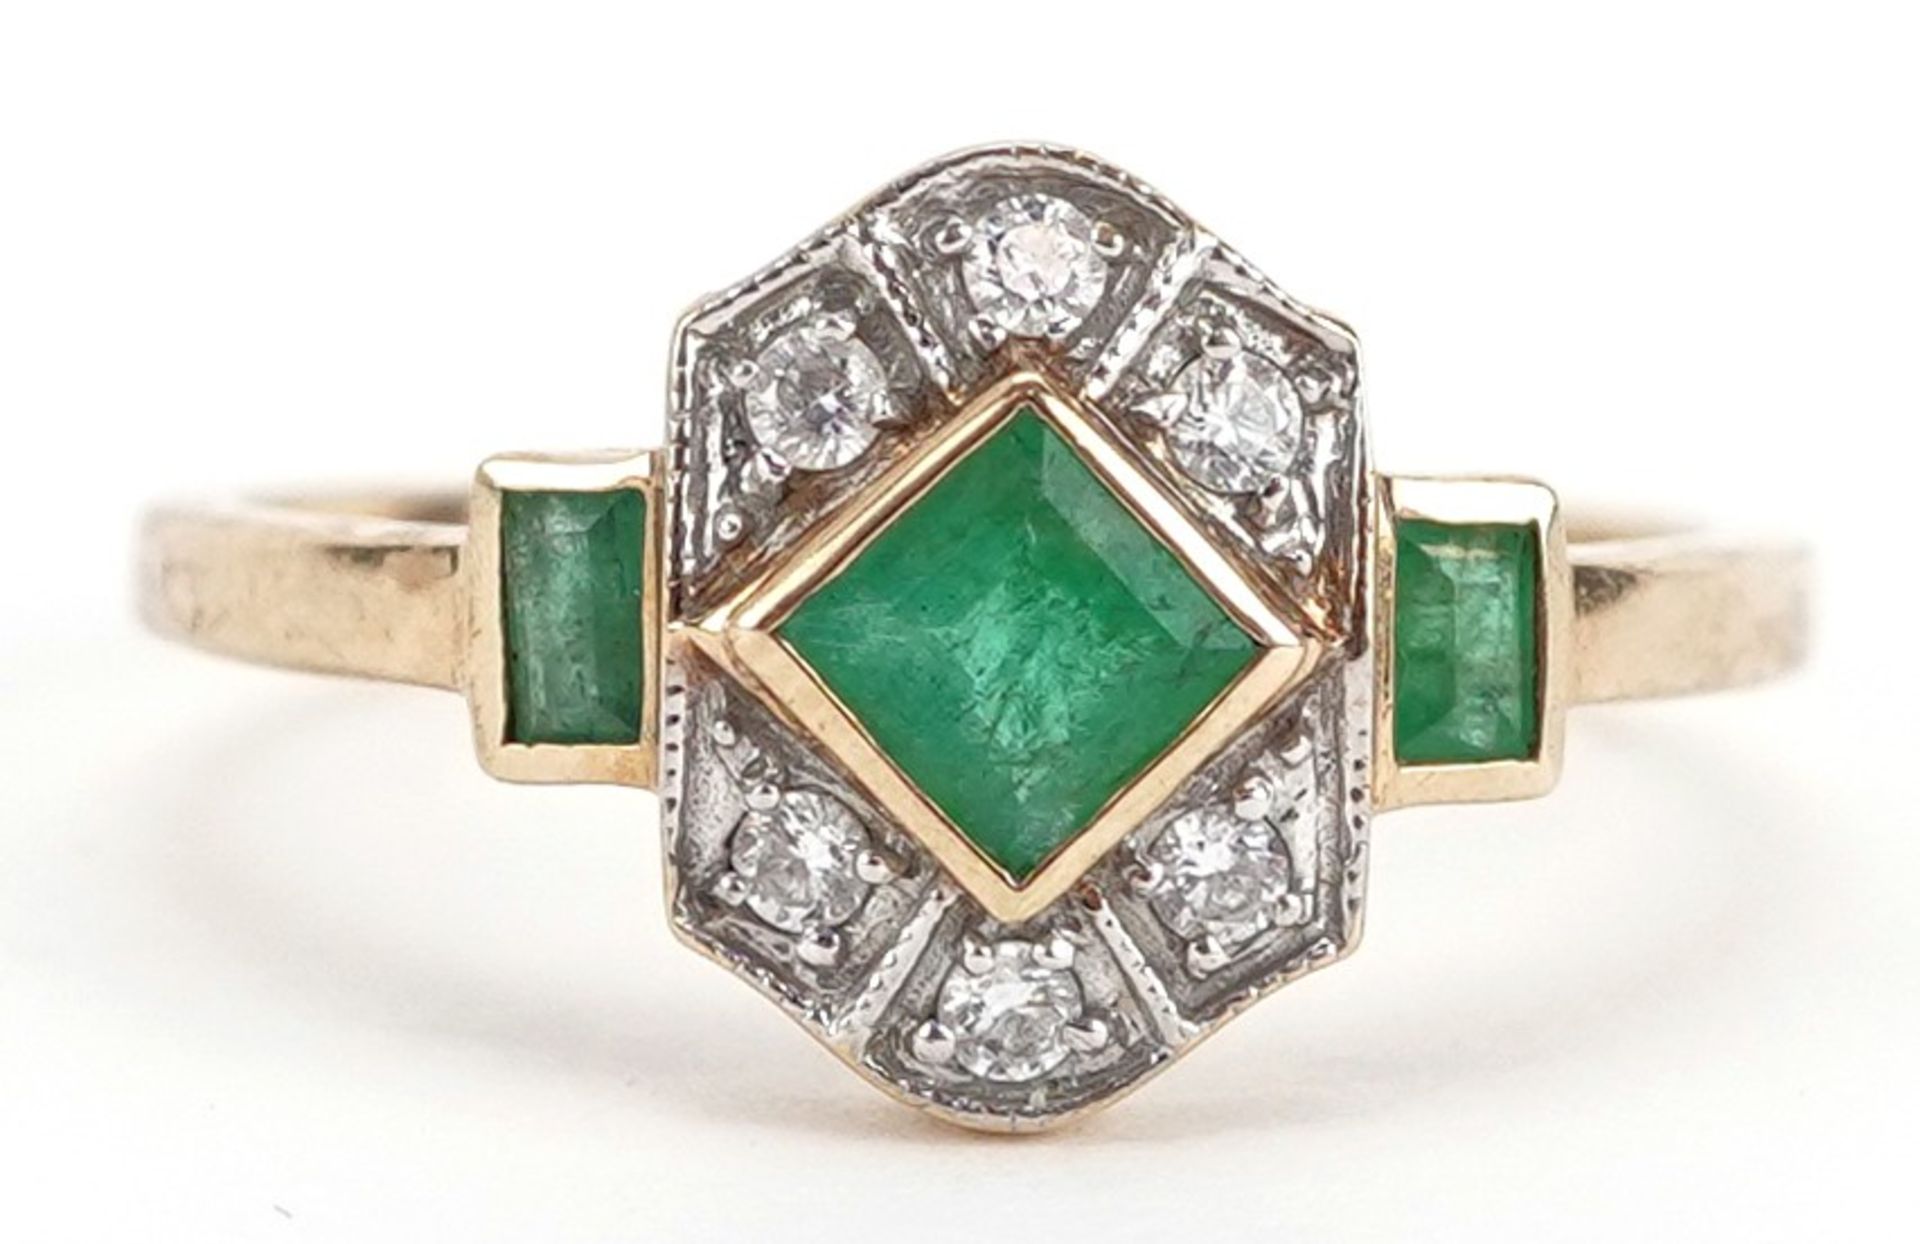 Art Deco style 9ct gold emerald and clear stone ring, size M/N, 2.2g : For further information on